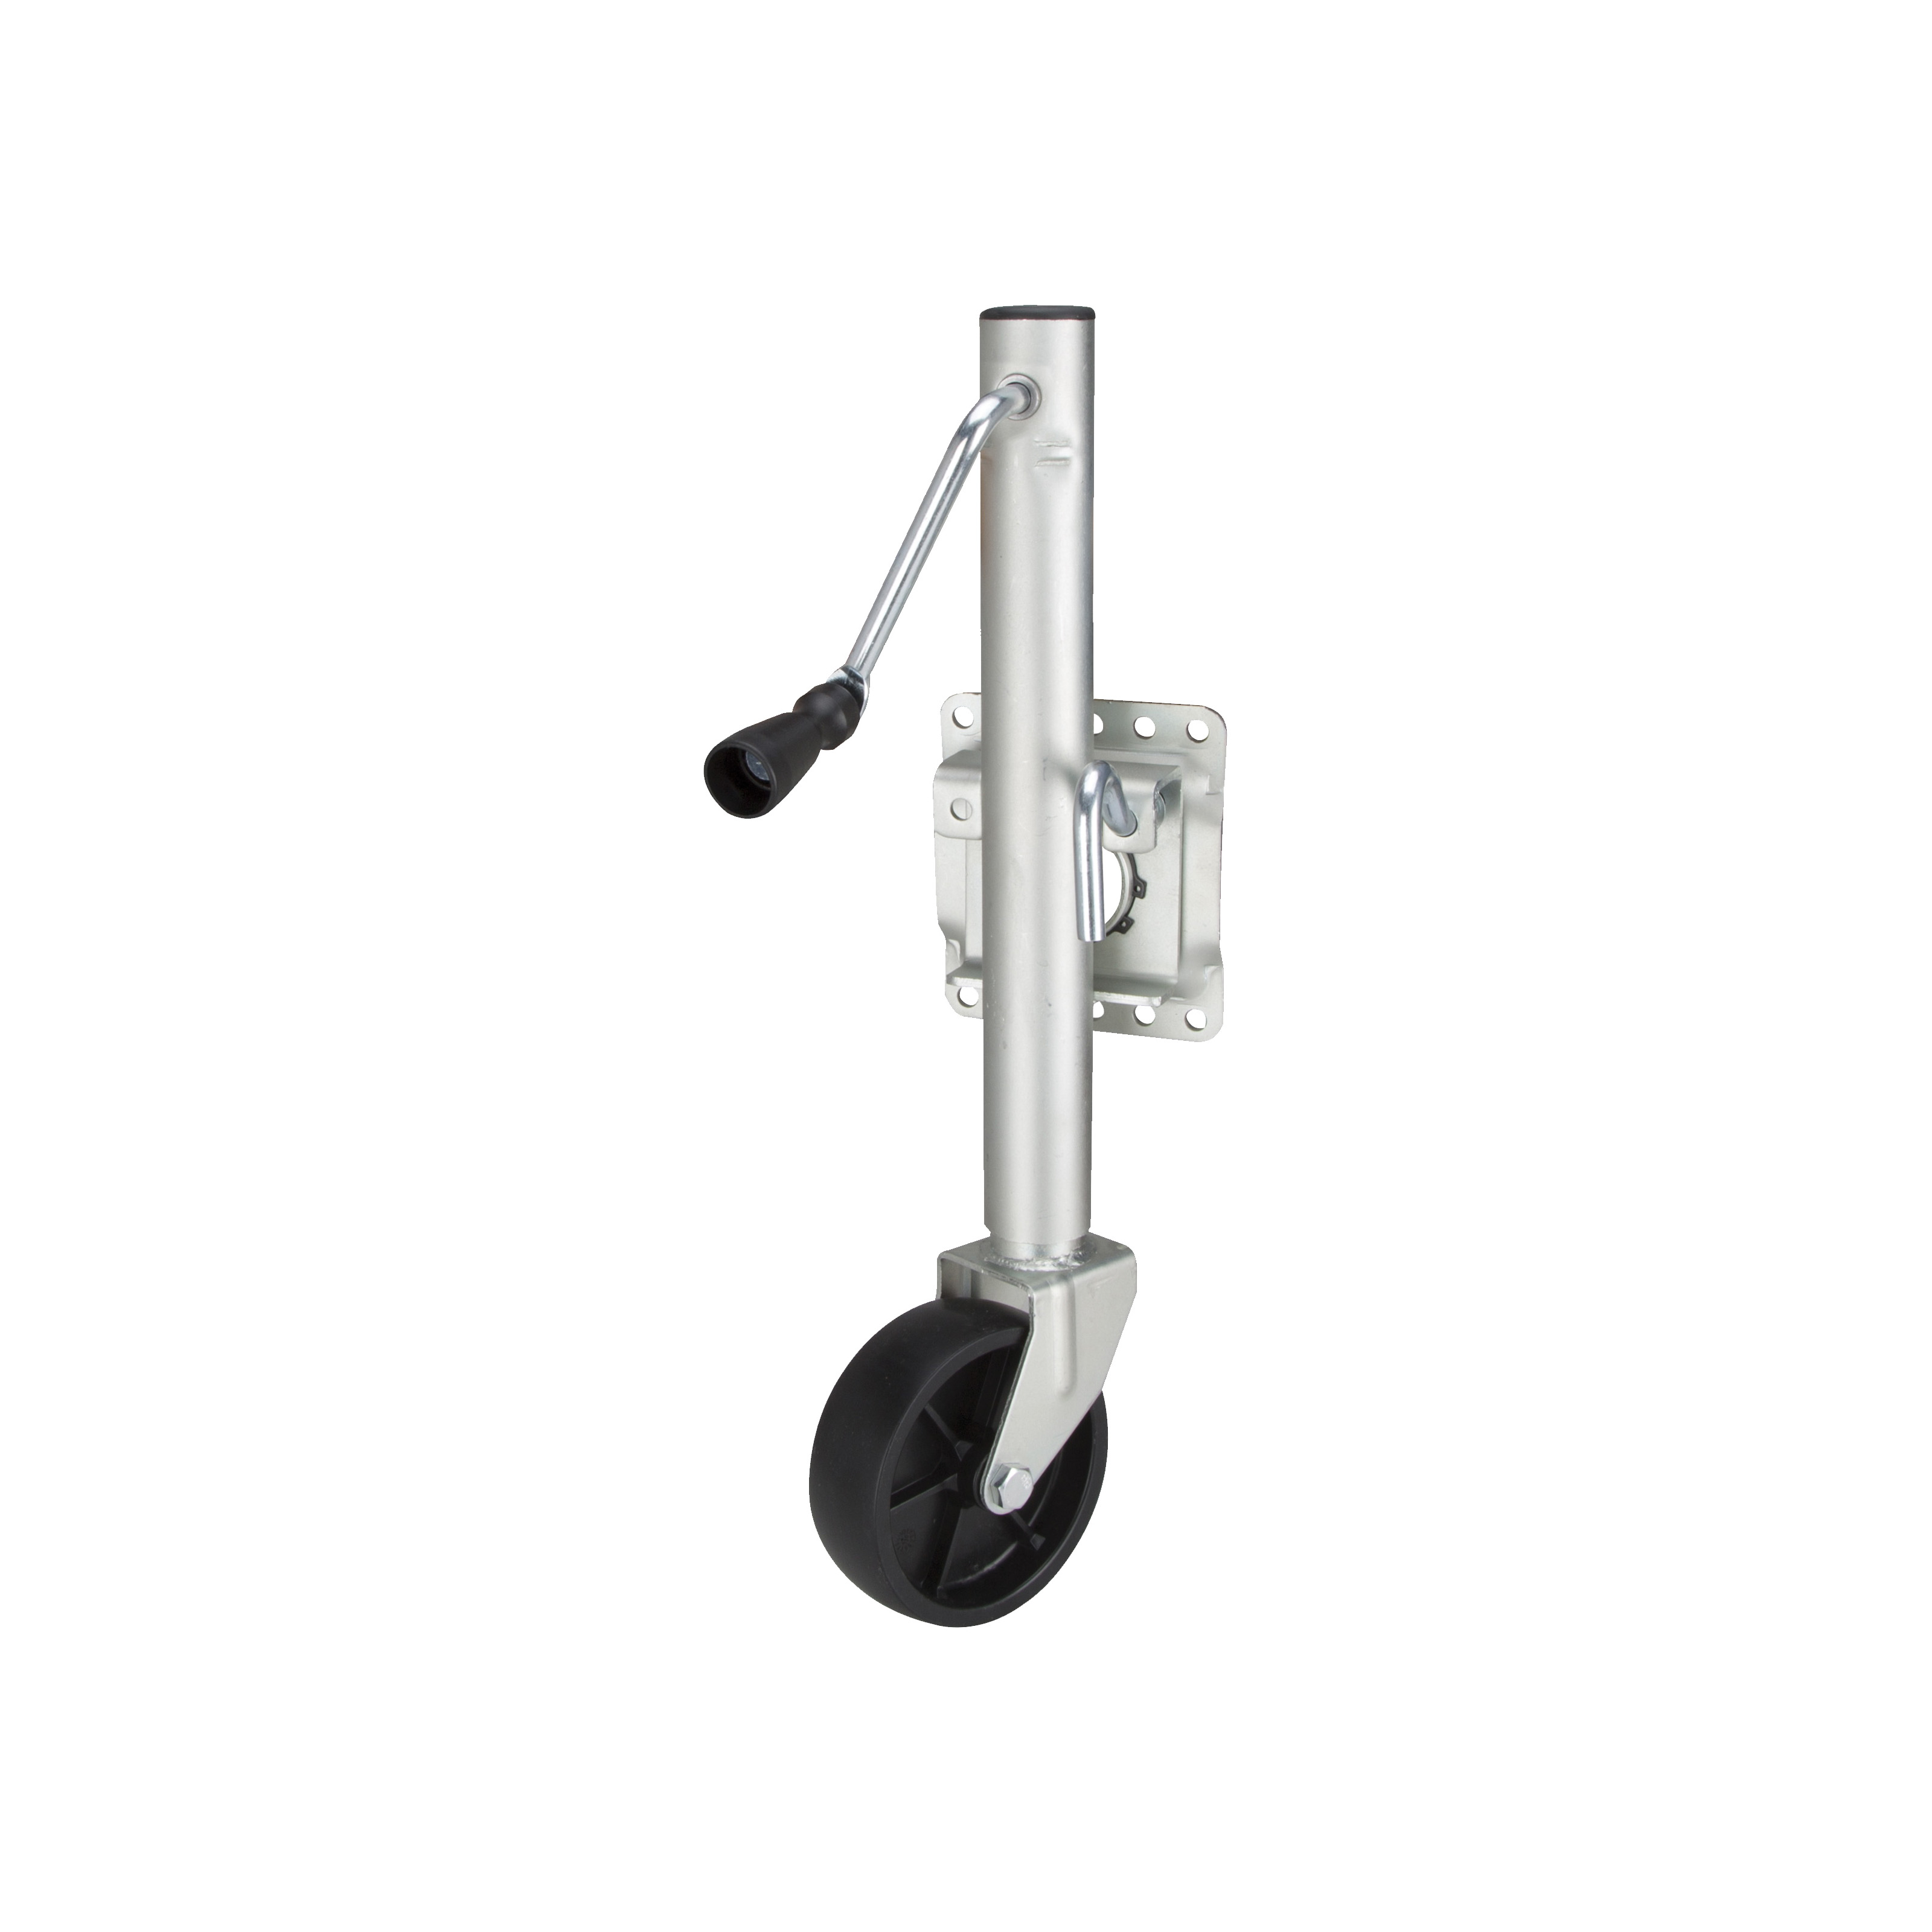 HBB15 Trailer Jack, 1000 lb Lifting, 22-3/4 in Max Lift H, Spiral Lifting, 16-1/2 to 26-1/2 in OAH, Steel